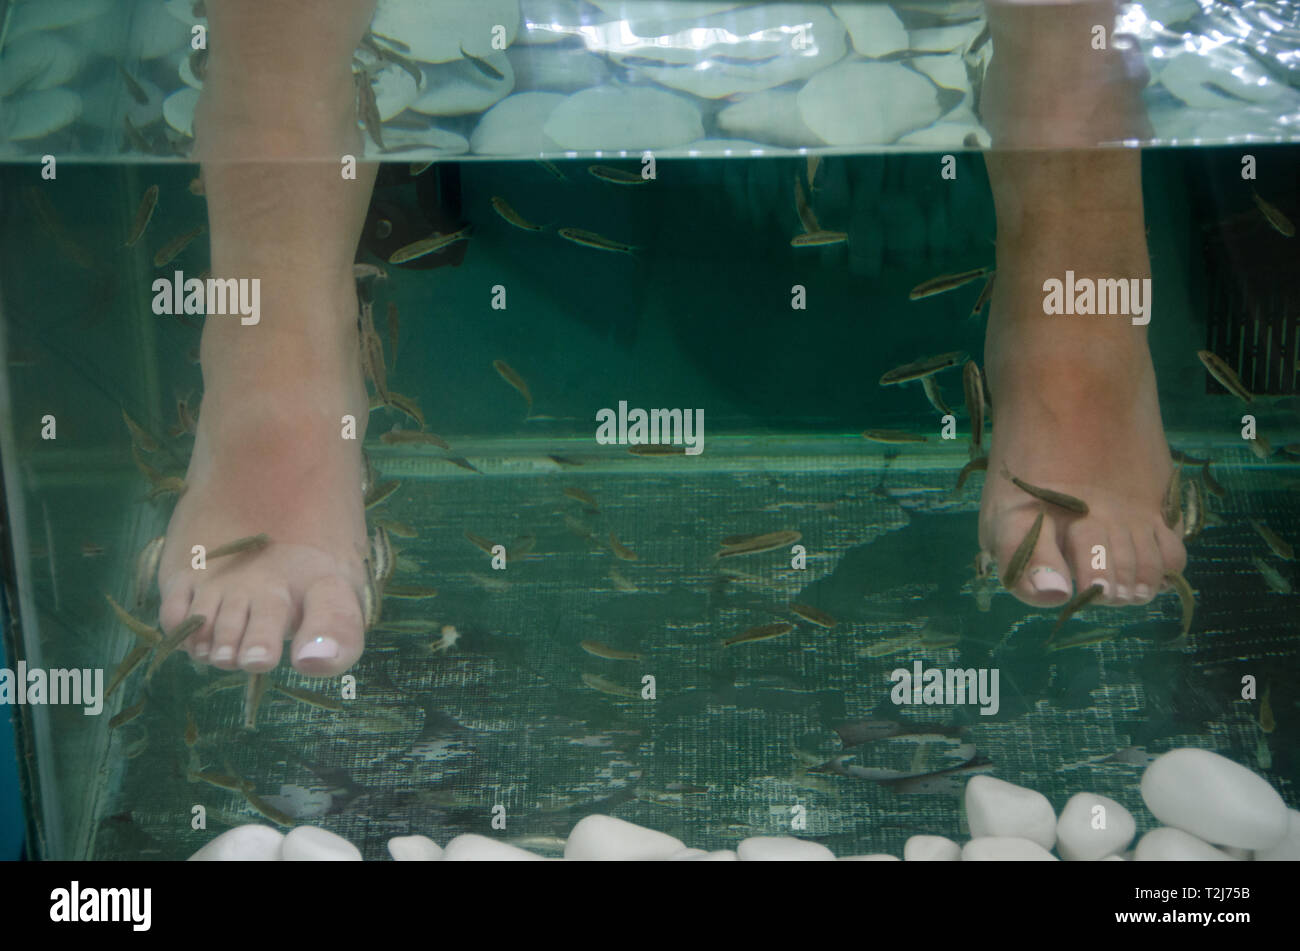 A fish spa in Santorini, Greece, uses tiny fish called Garra Rufa to eat away dead skin found on peoples' feet, leaving newer skin exposed. Stock Photo